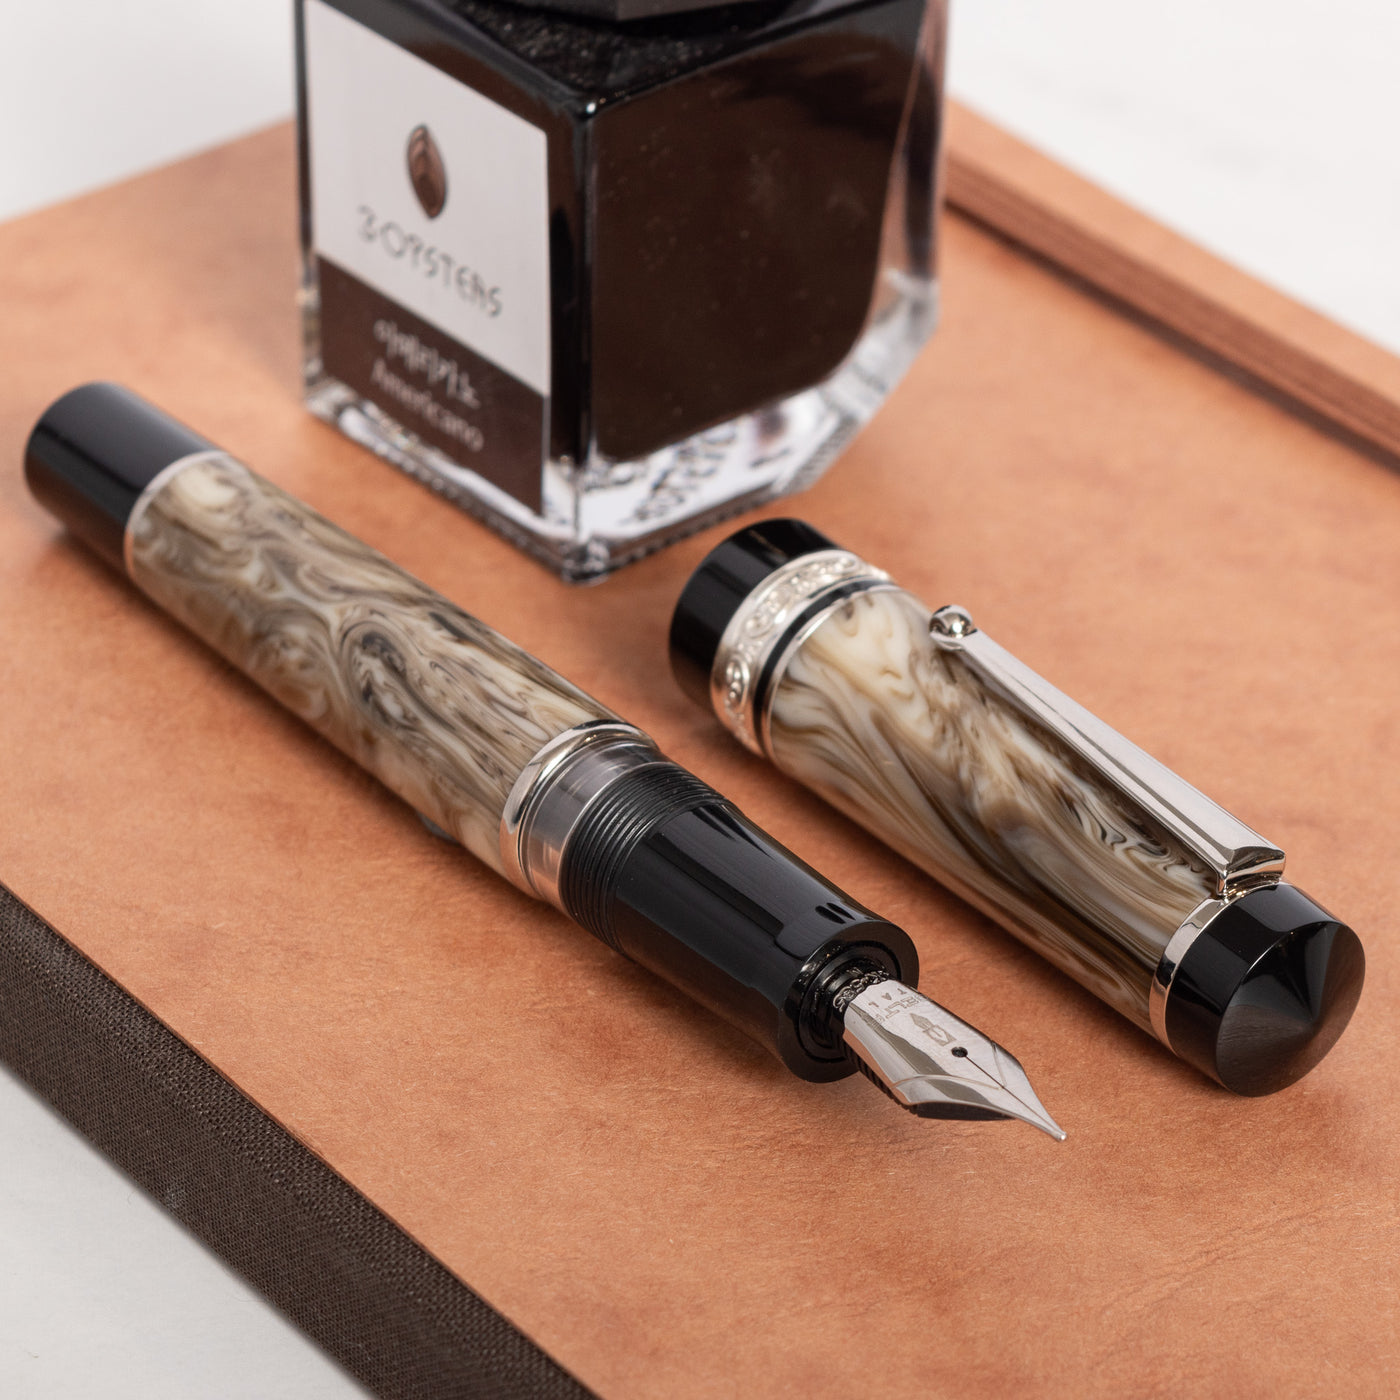 Delta Montepetra Limited Edition Fountain Pen black and brown